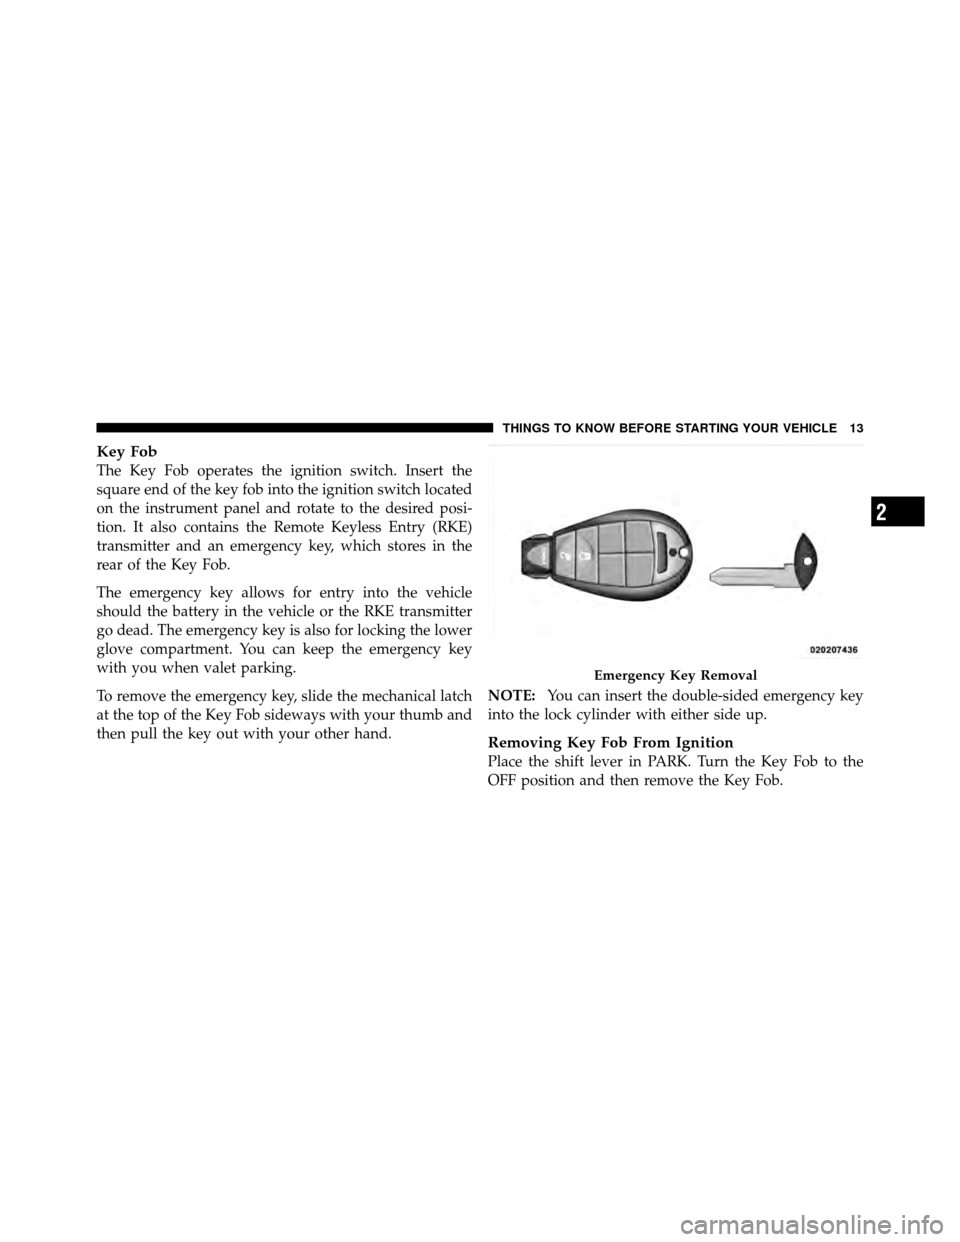 CHRYSLER TOWN AND COUNTRY 2012 5.G Owners Manual Key Fob
The Key Fob operates the ignition switch. Insert the
square end of the key fob into the ignition switch located
on the instrument panel and rotate to the desired posi-
tion. It also contains t